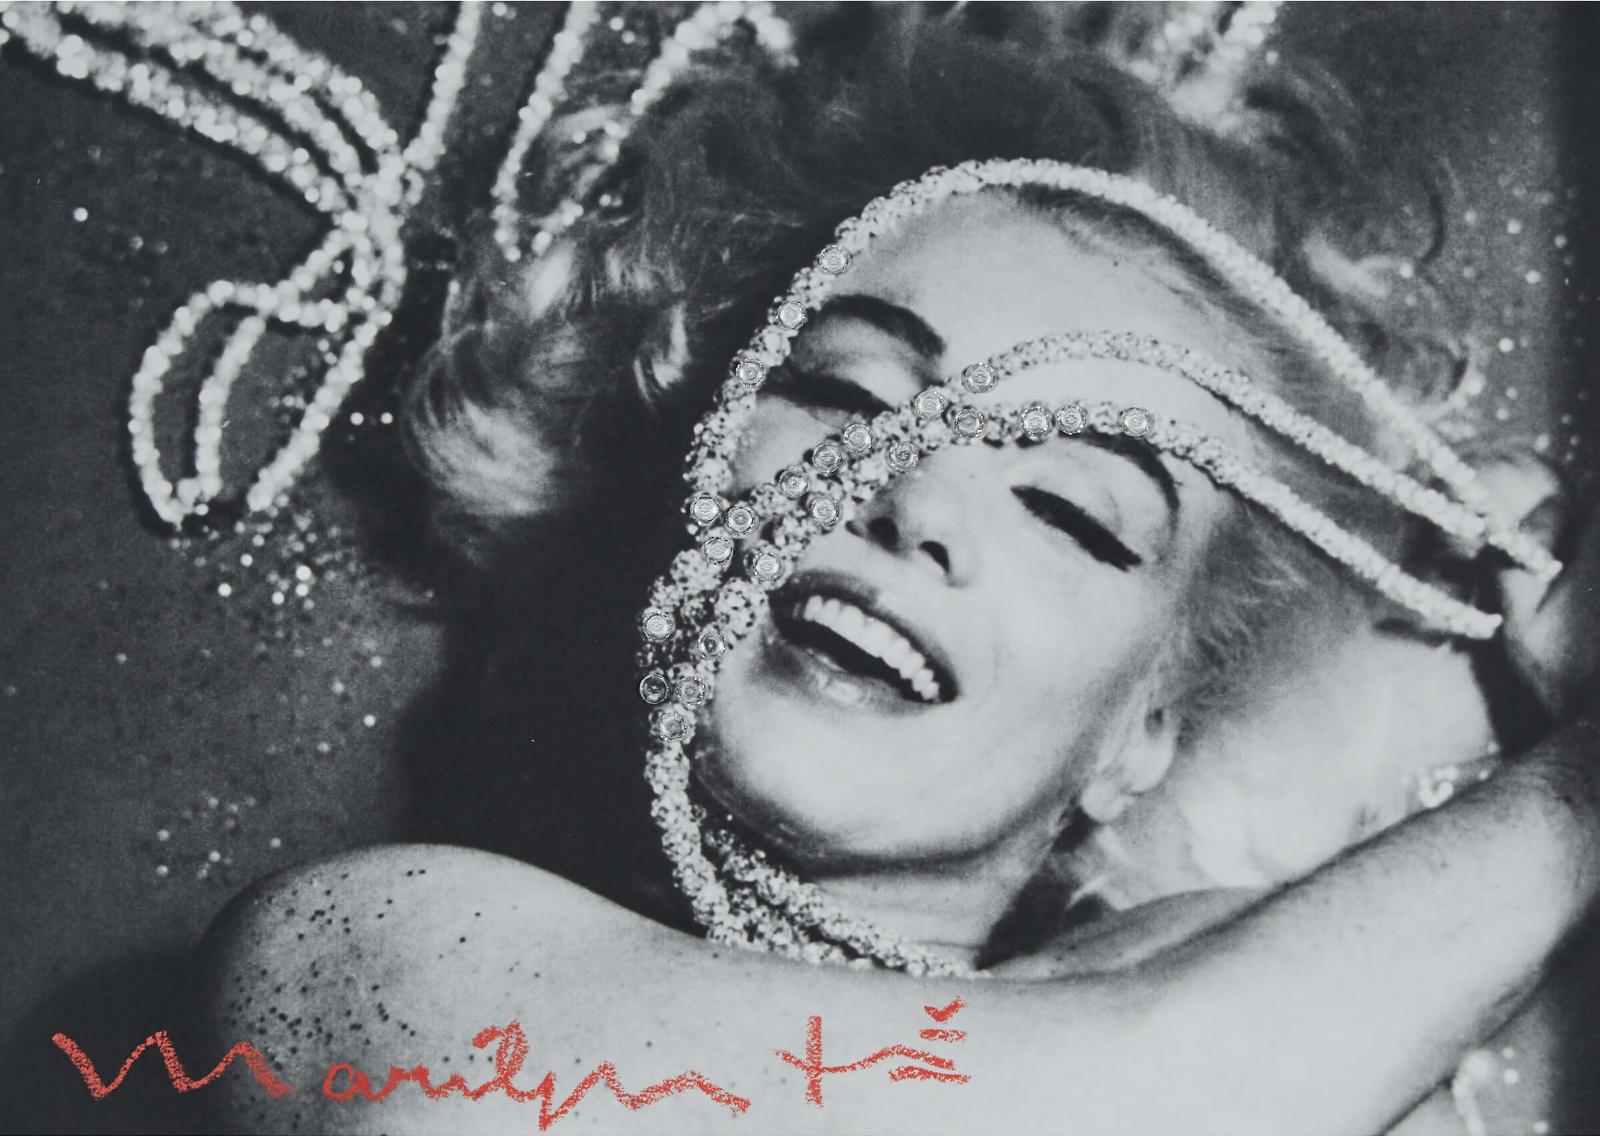 Bert Stern (1929-2013) - Marilyn With Diamonds, 2012 (Later Impression)